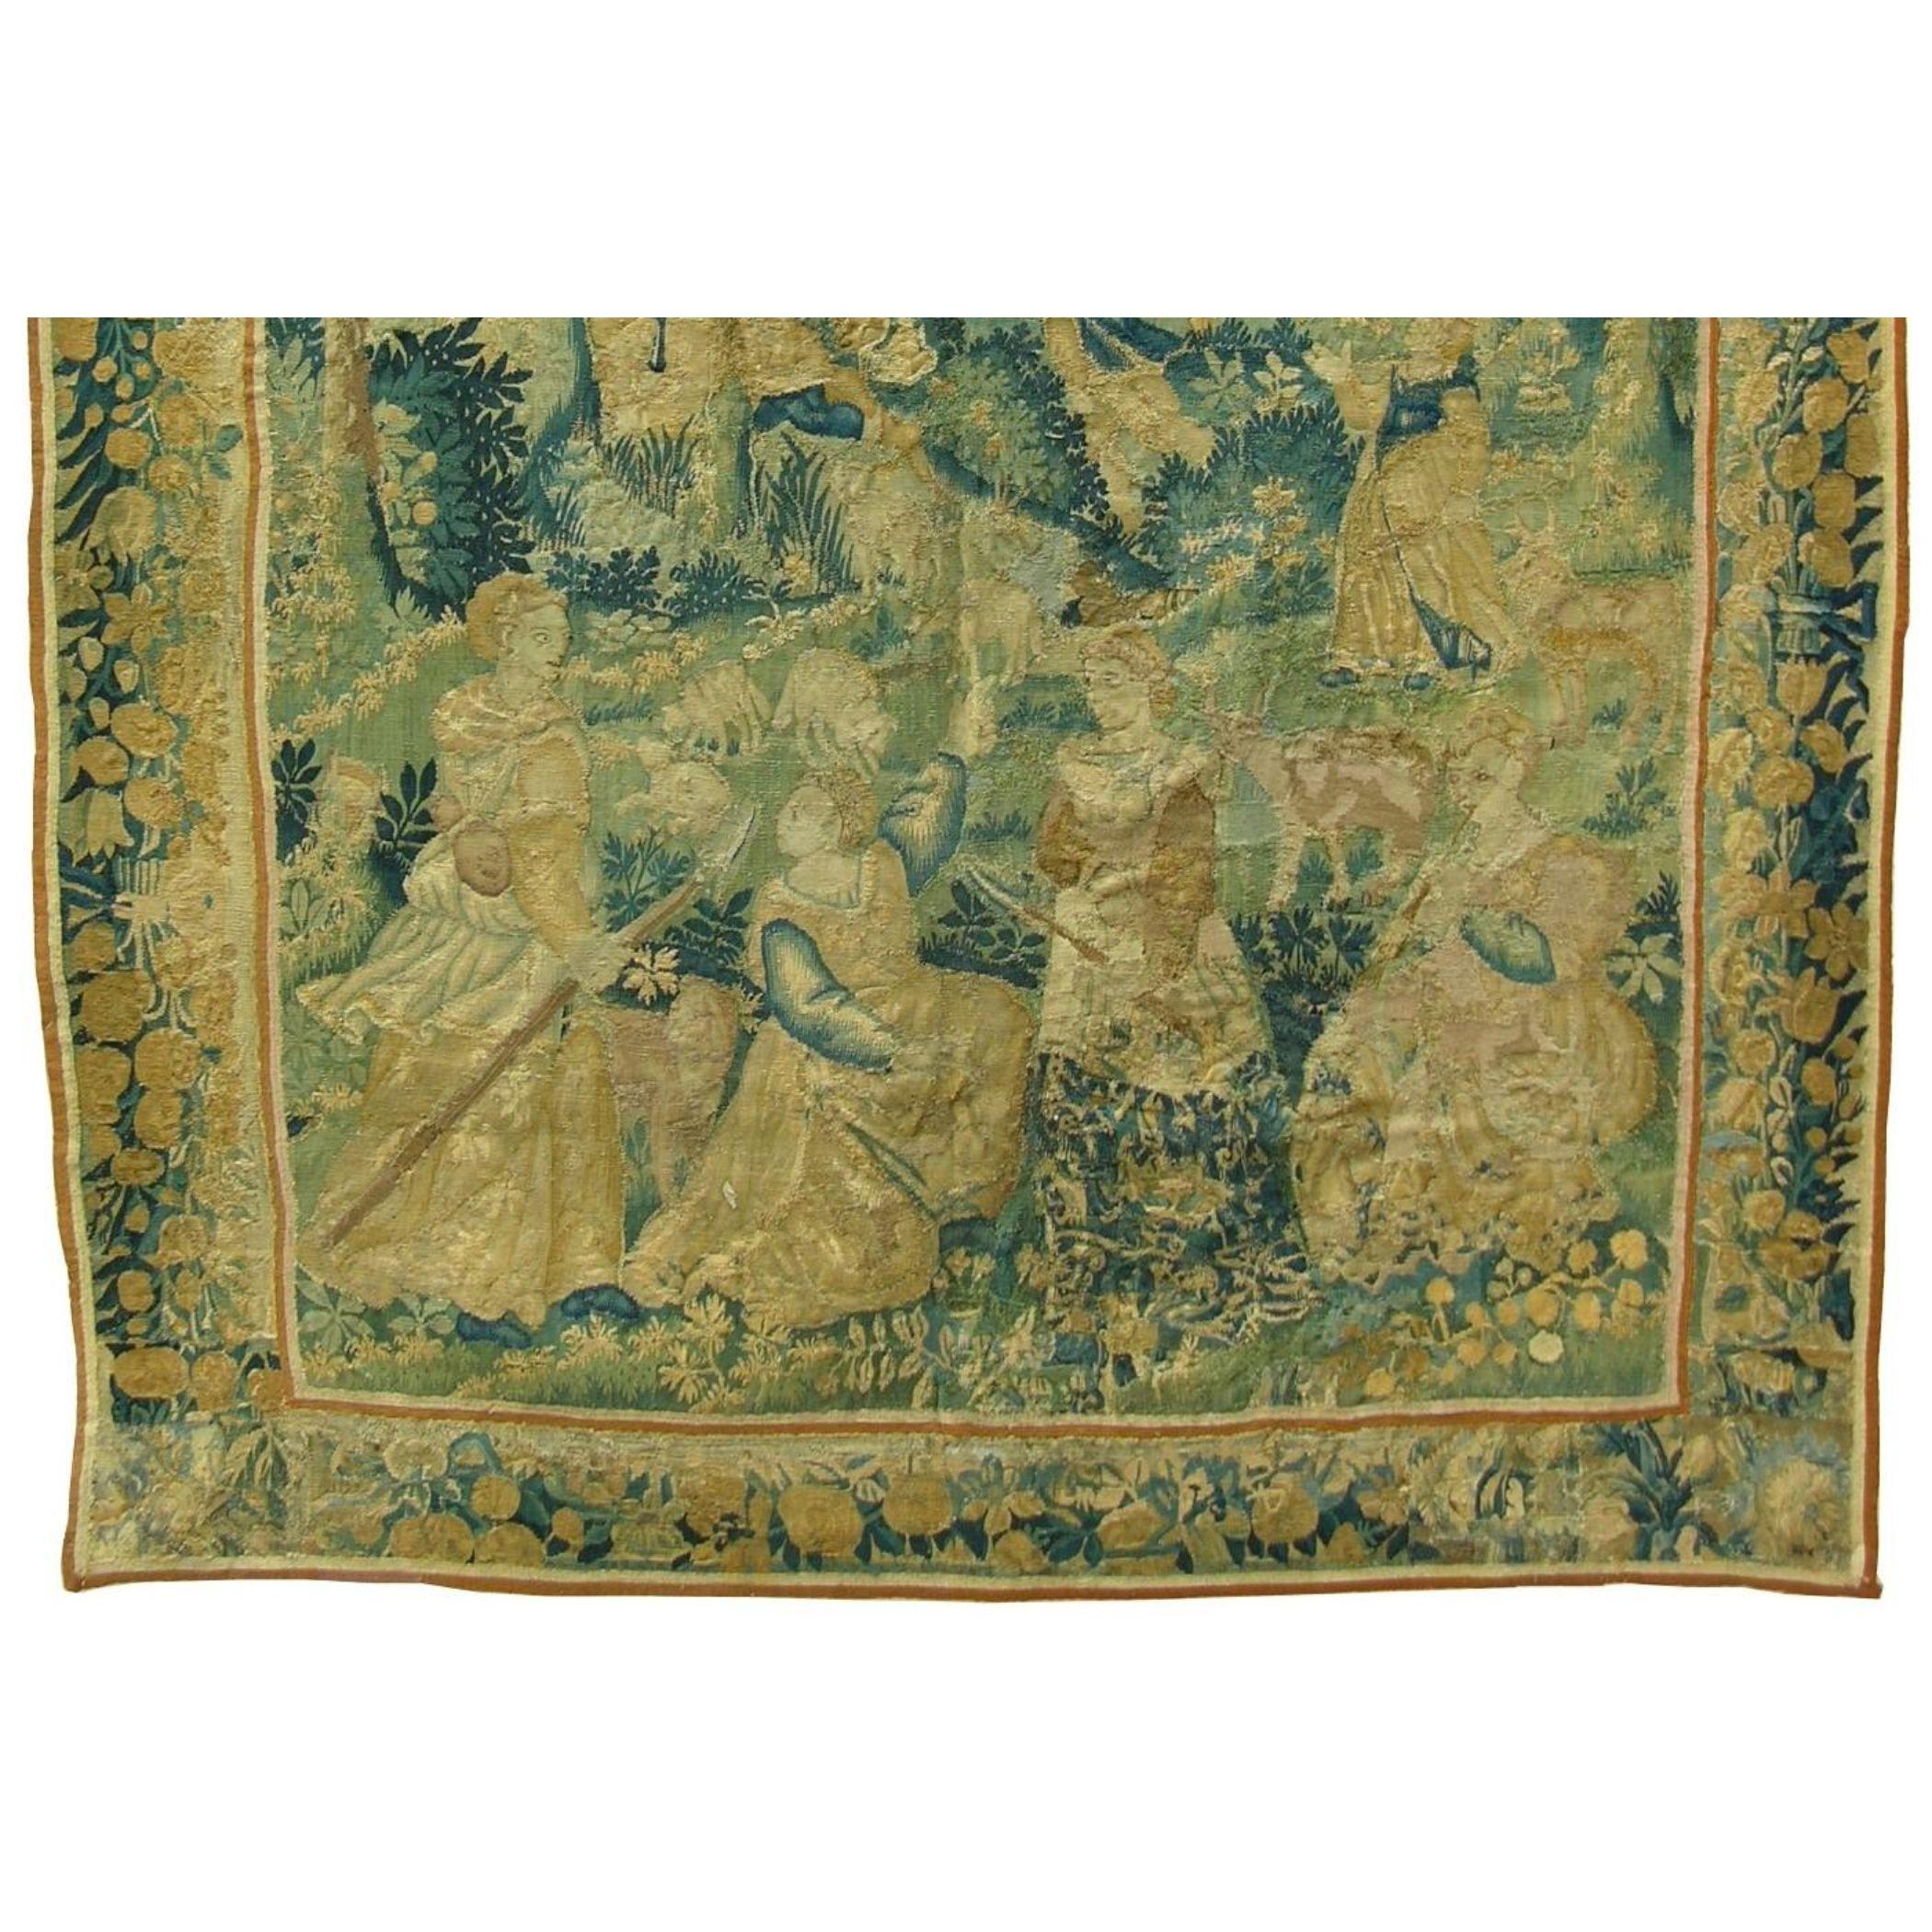 Unknown 17th Century Brussels Tapestry 8'8